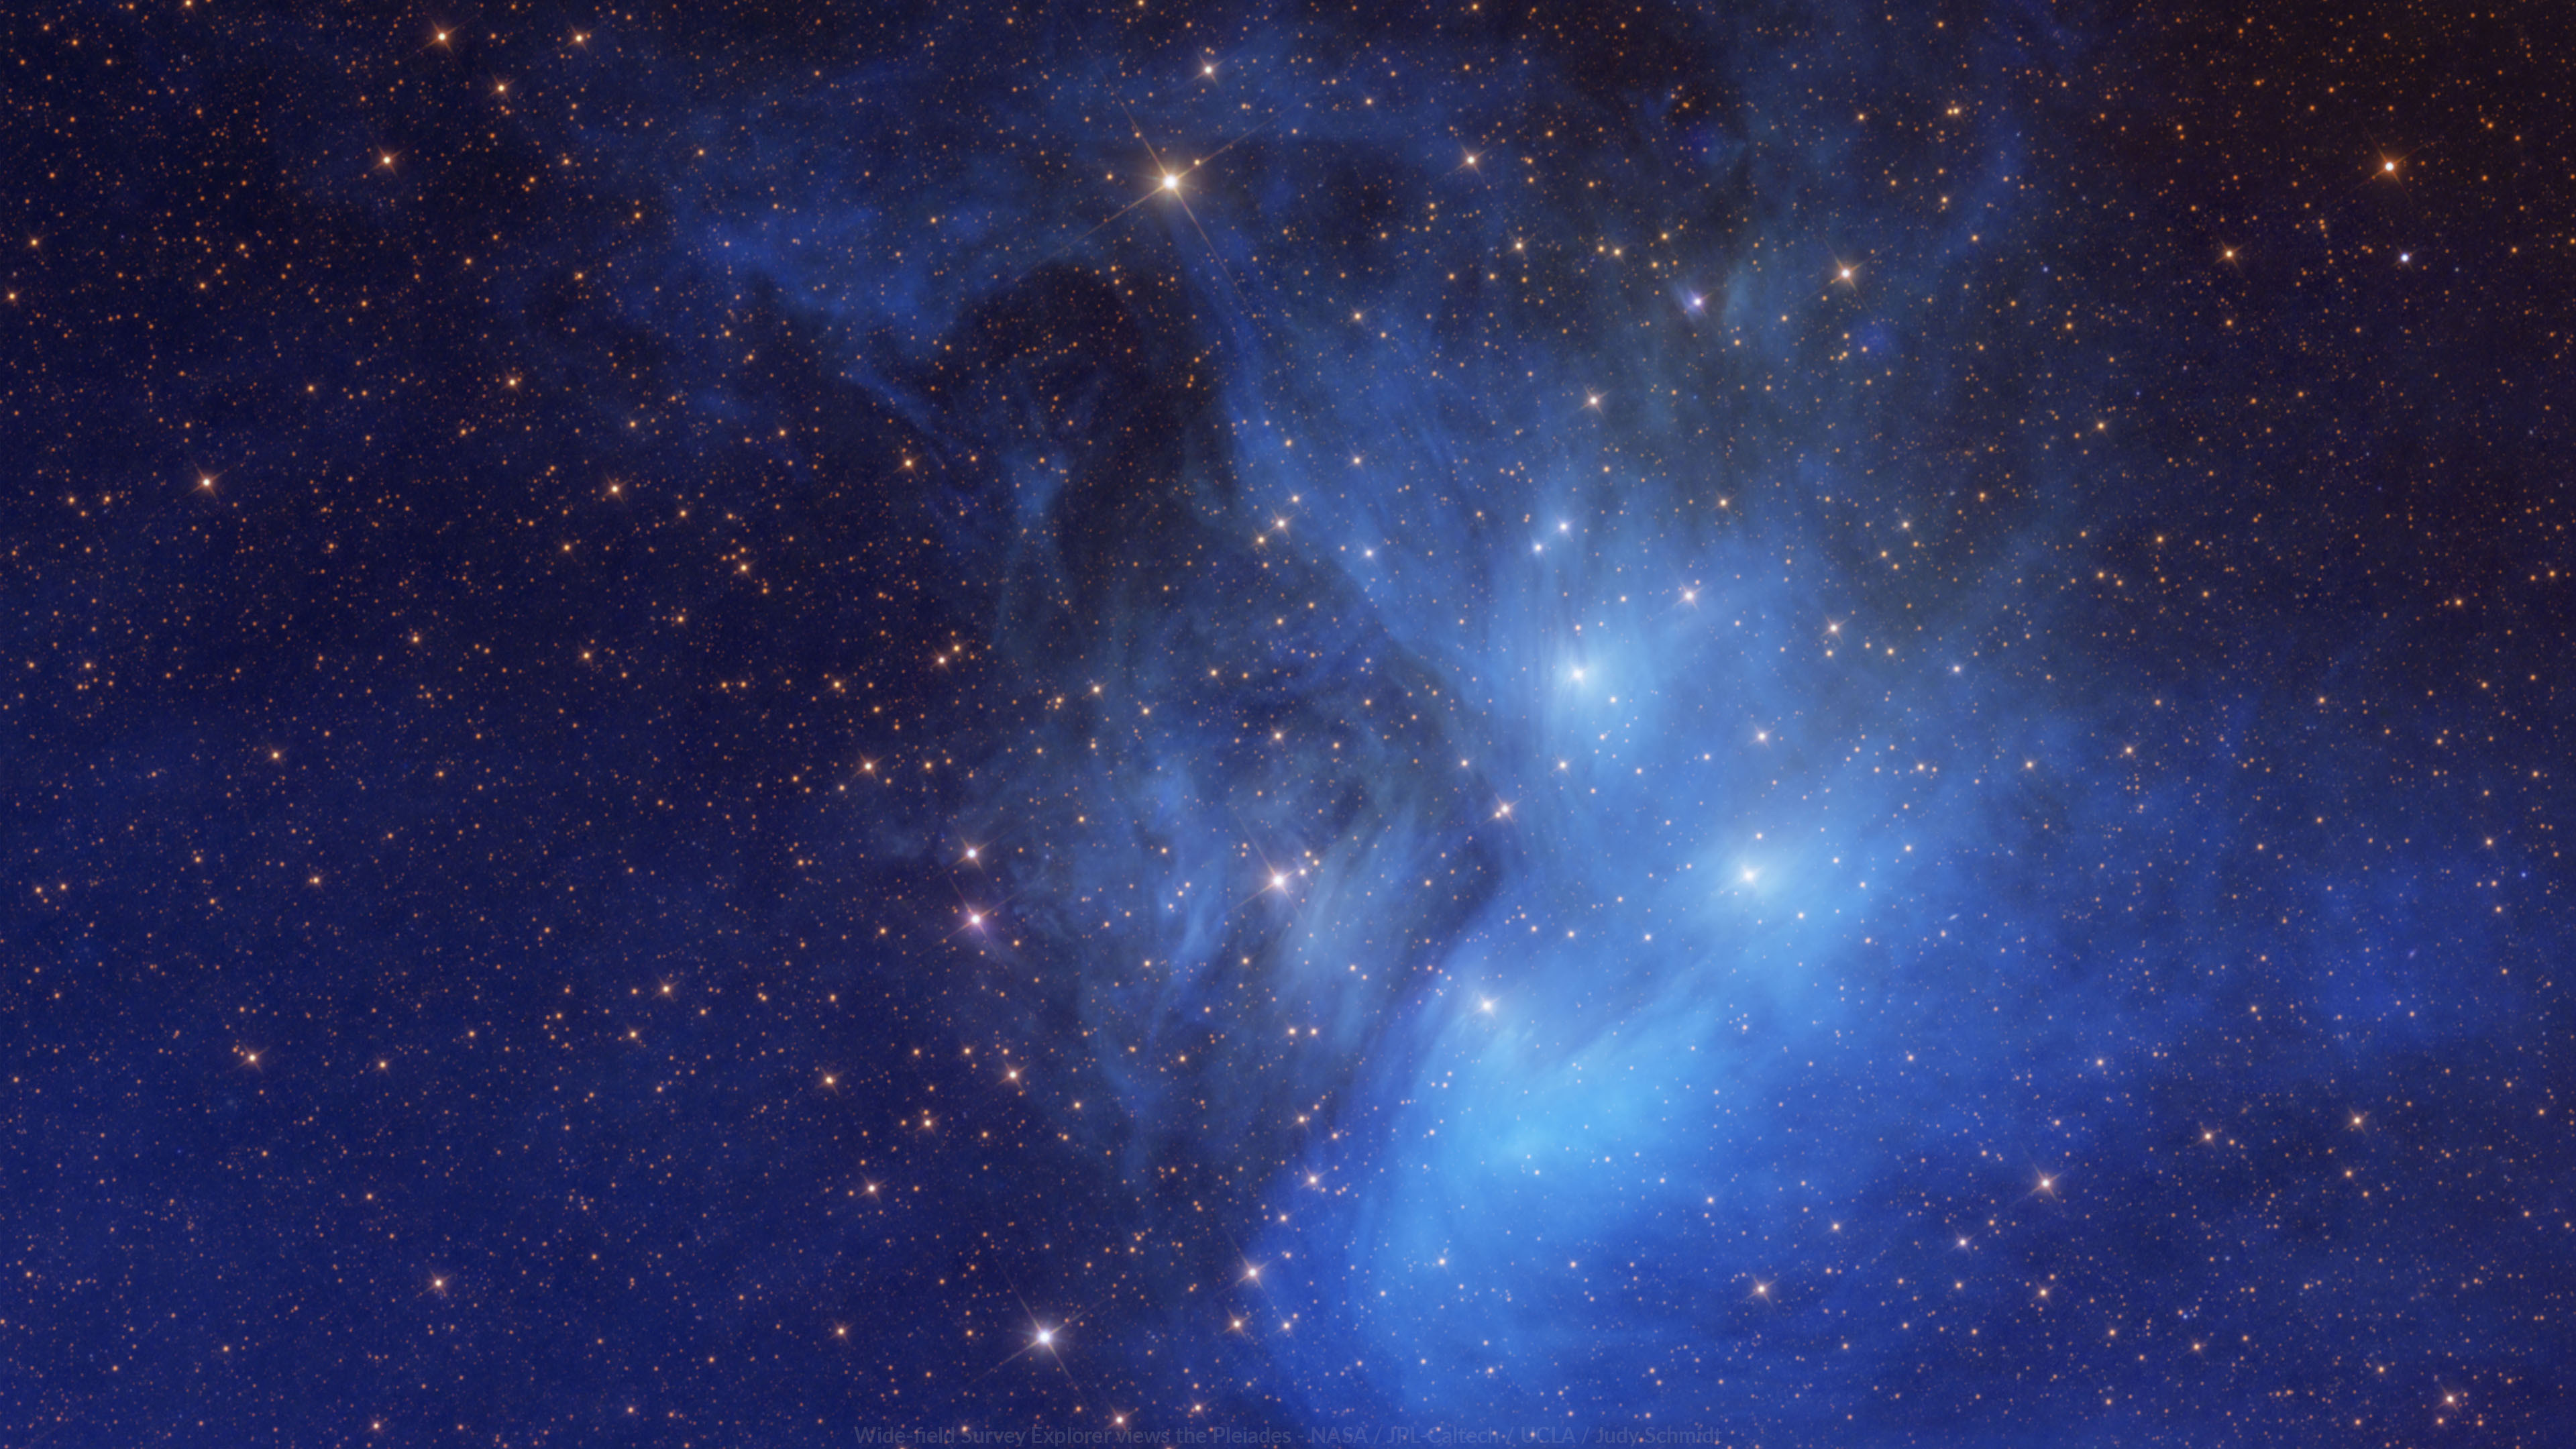 Wallpaper: Blue WISE Pleiades | The Planetary Society